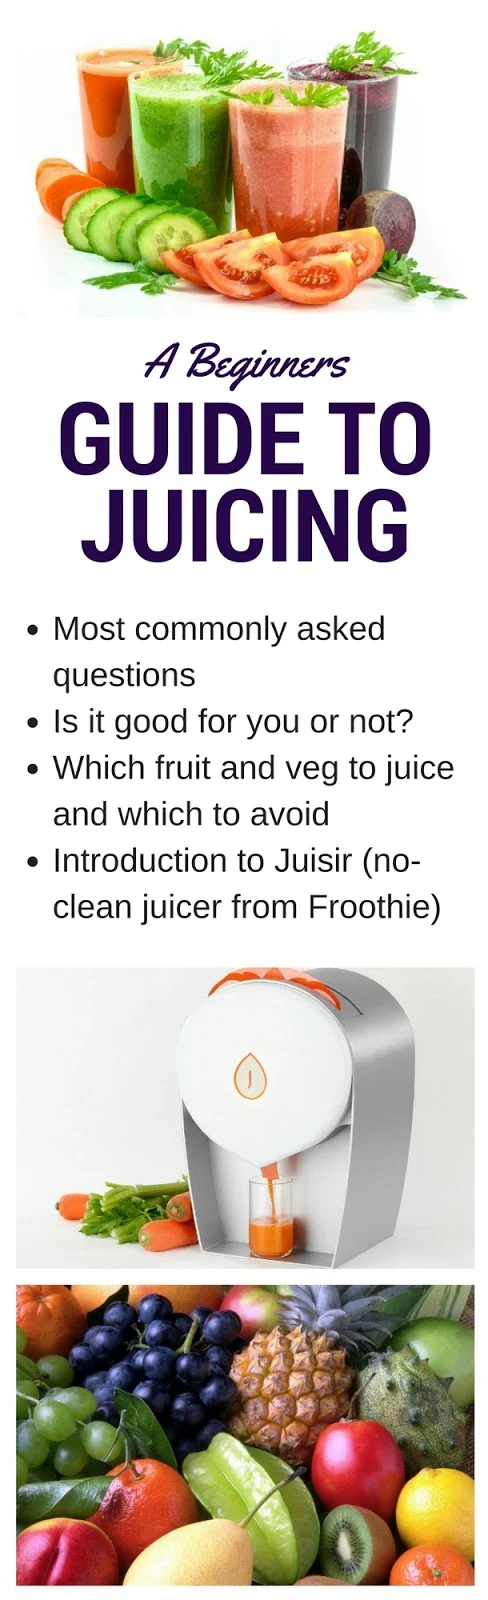 An easy guide to juicing, why it's good for you and what to juice as well as an introduction to the Juisir, a new no-clean juicer from Froothie.